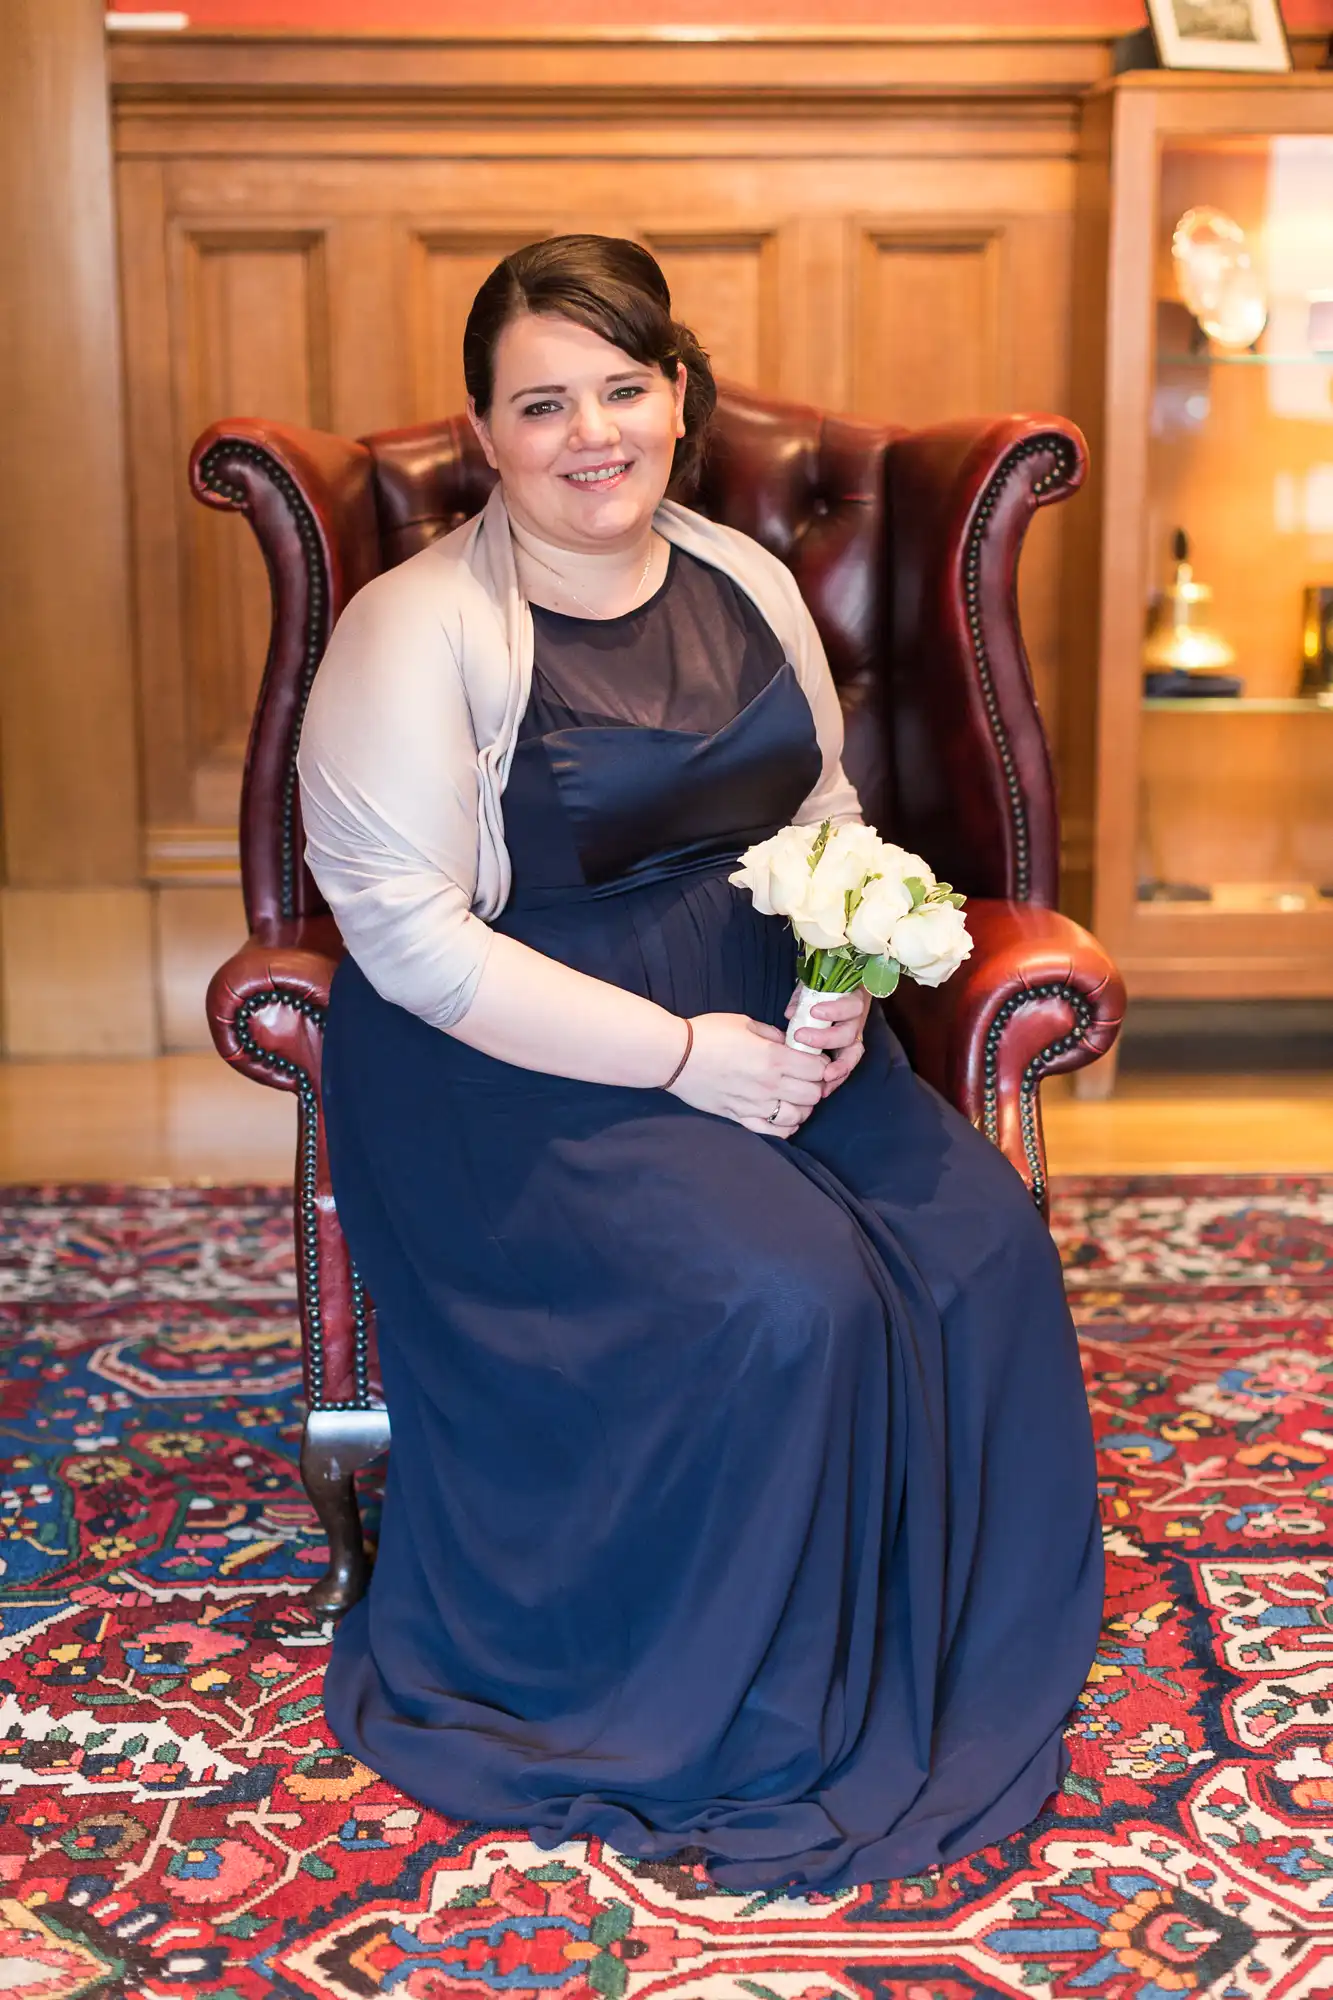 A woman in a navy blue evening gown and white shawl, holding a bouquet of white roses, seated in a red and blue patterned armchair.